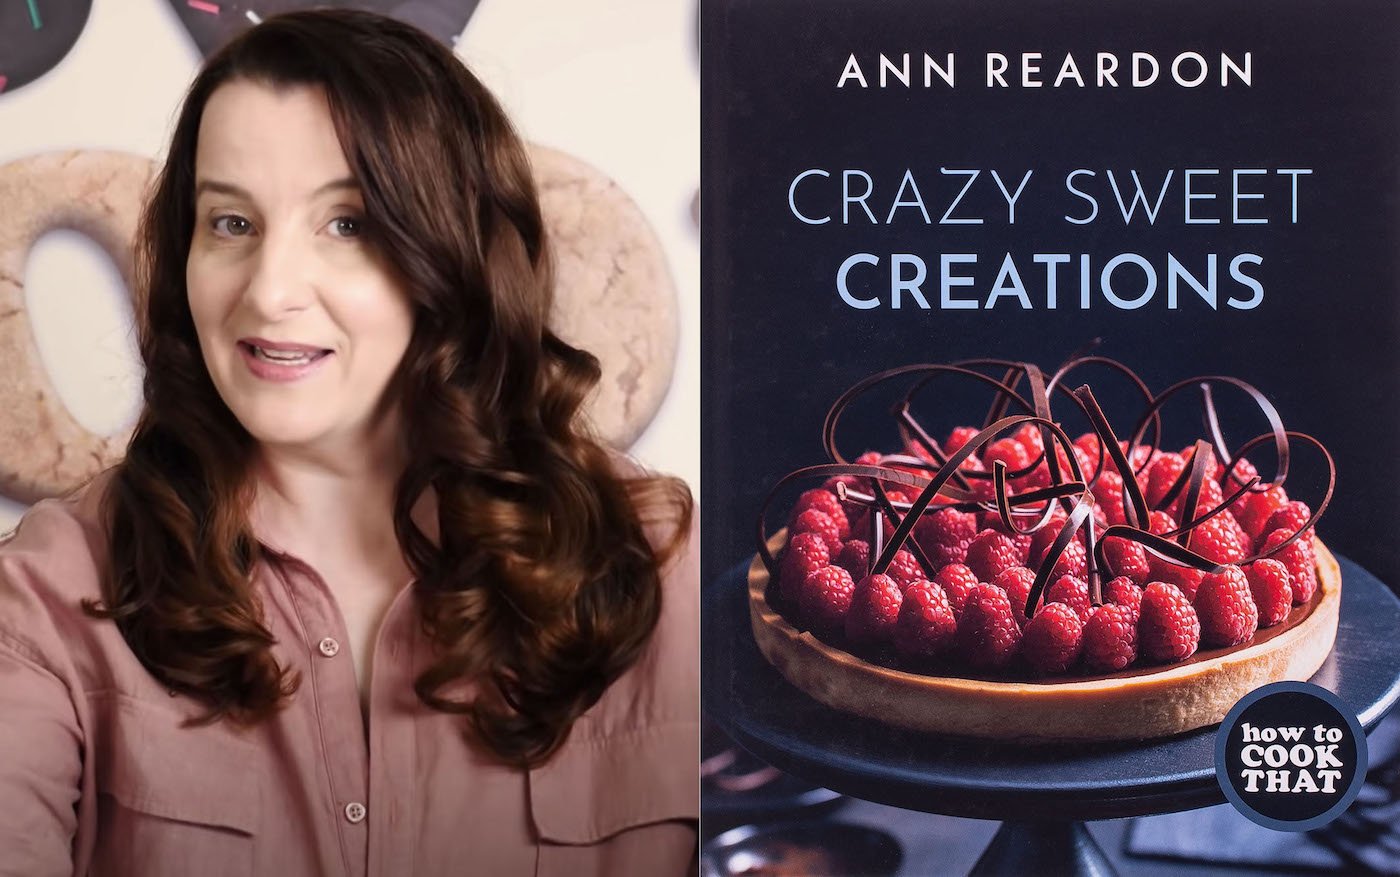 Q&A with Ann Reardon, author of Crazy Sweet Creations